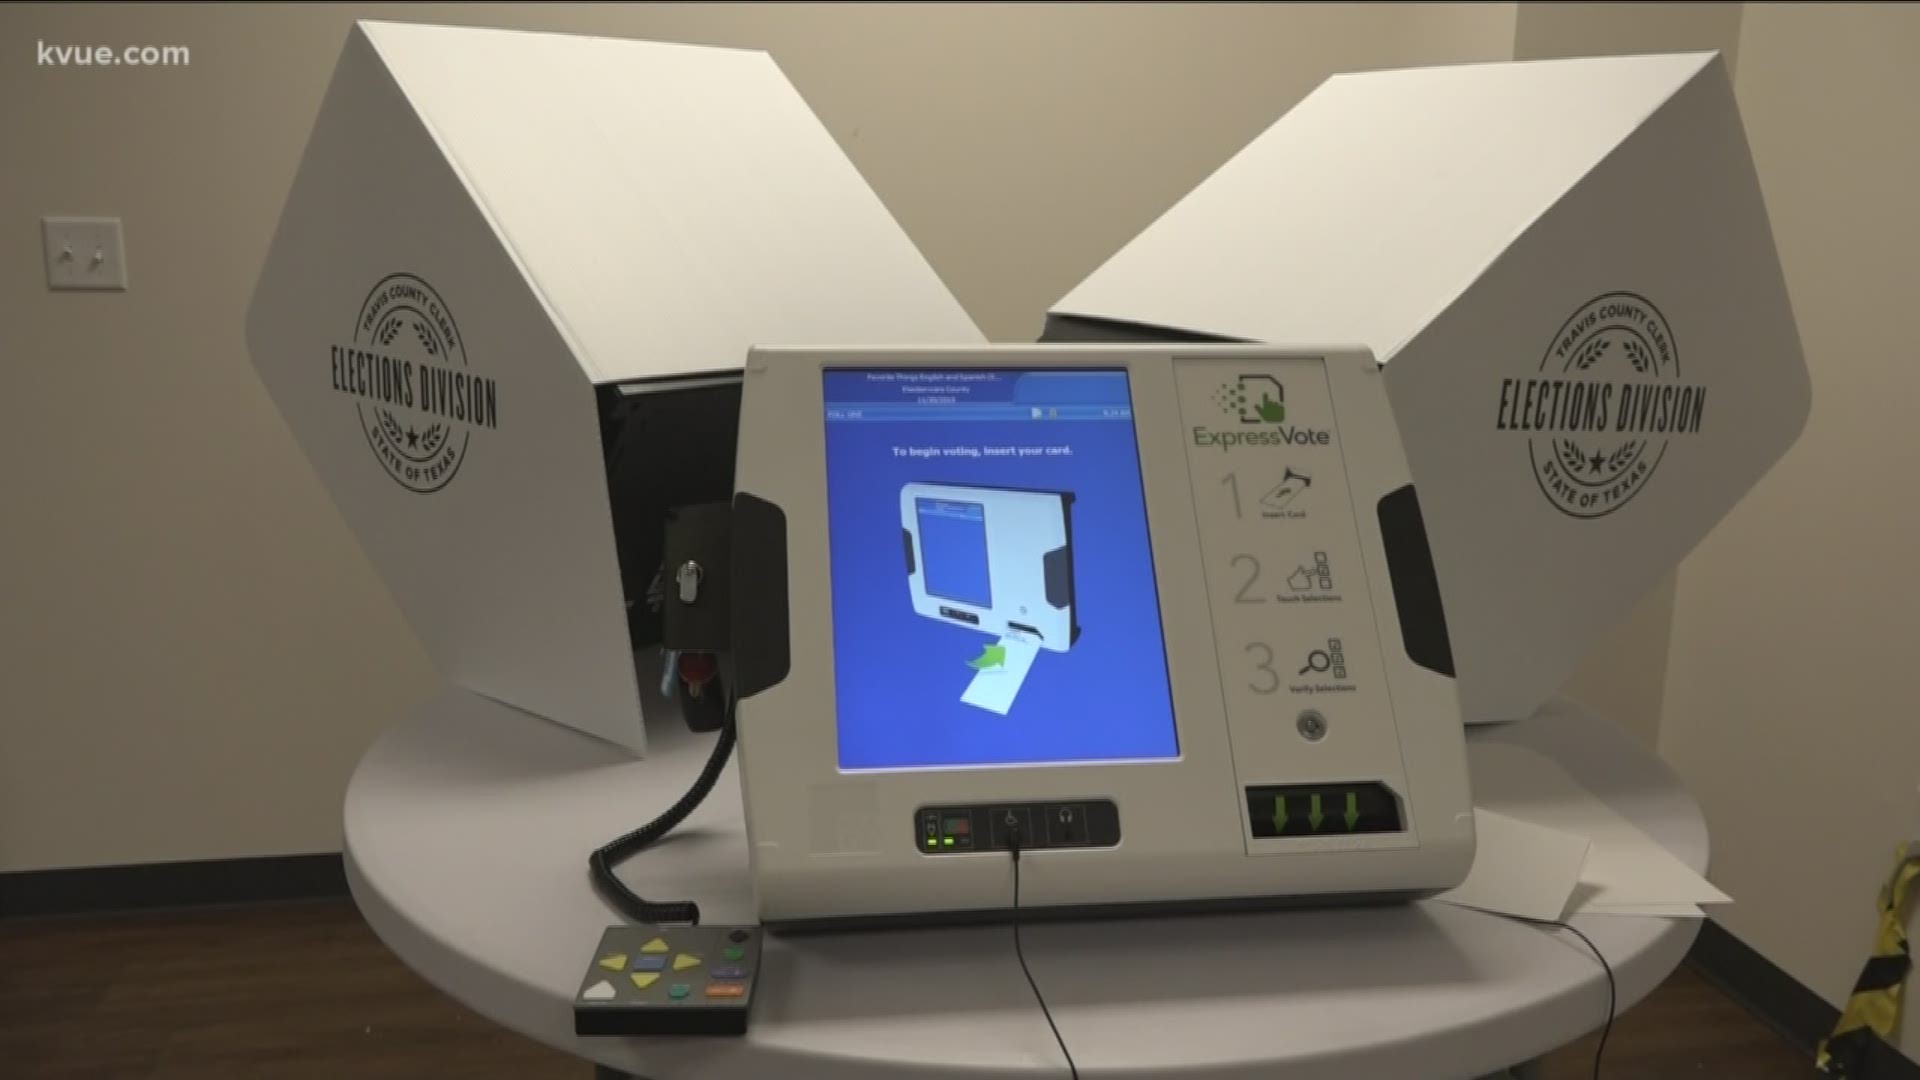 Texas Democrats have filed a lawsuit to bring back mobile voting sites after the state banned them.